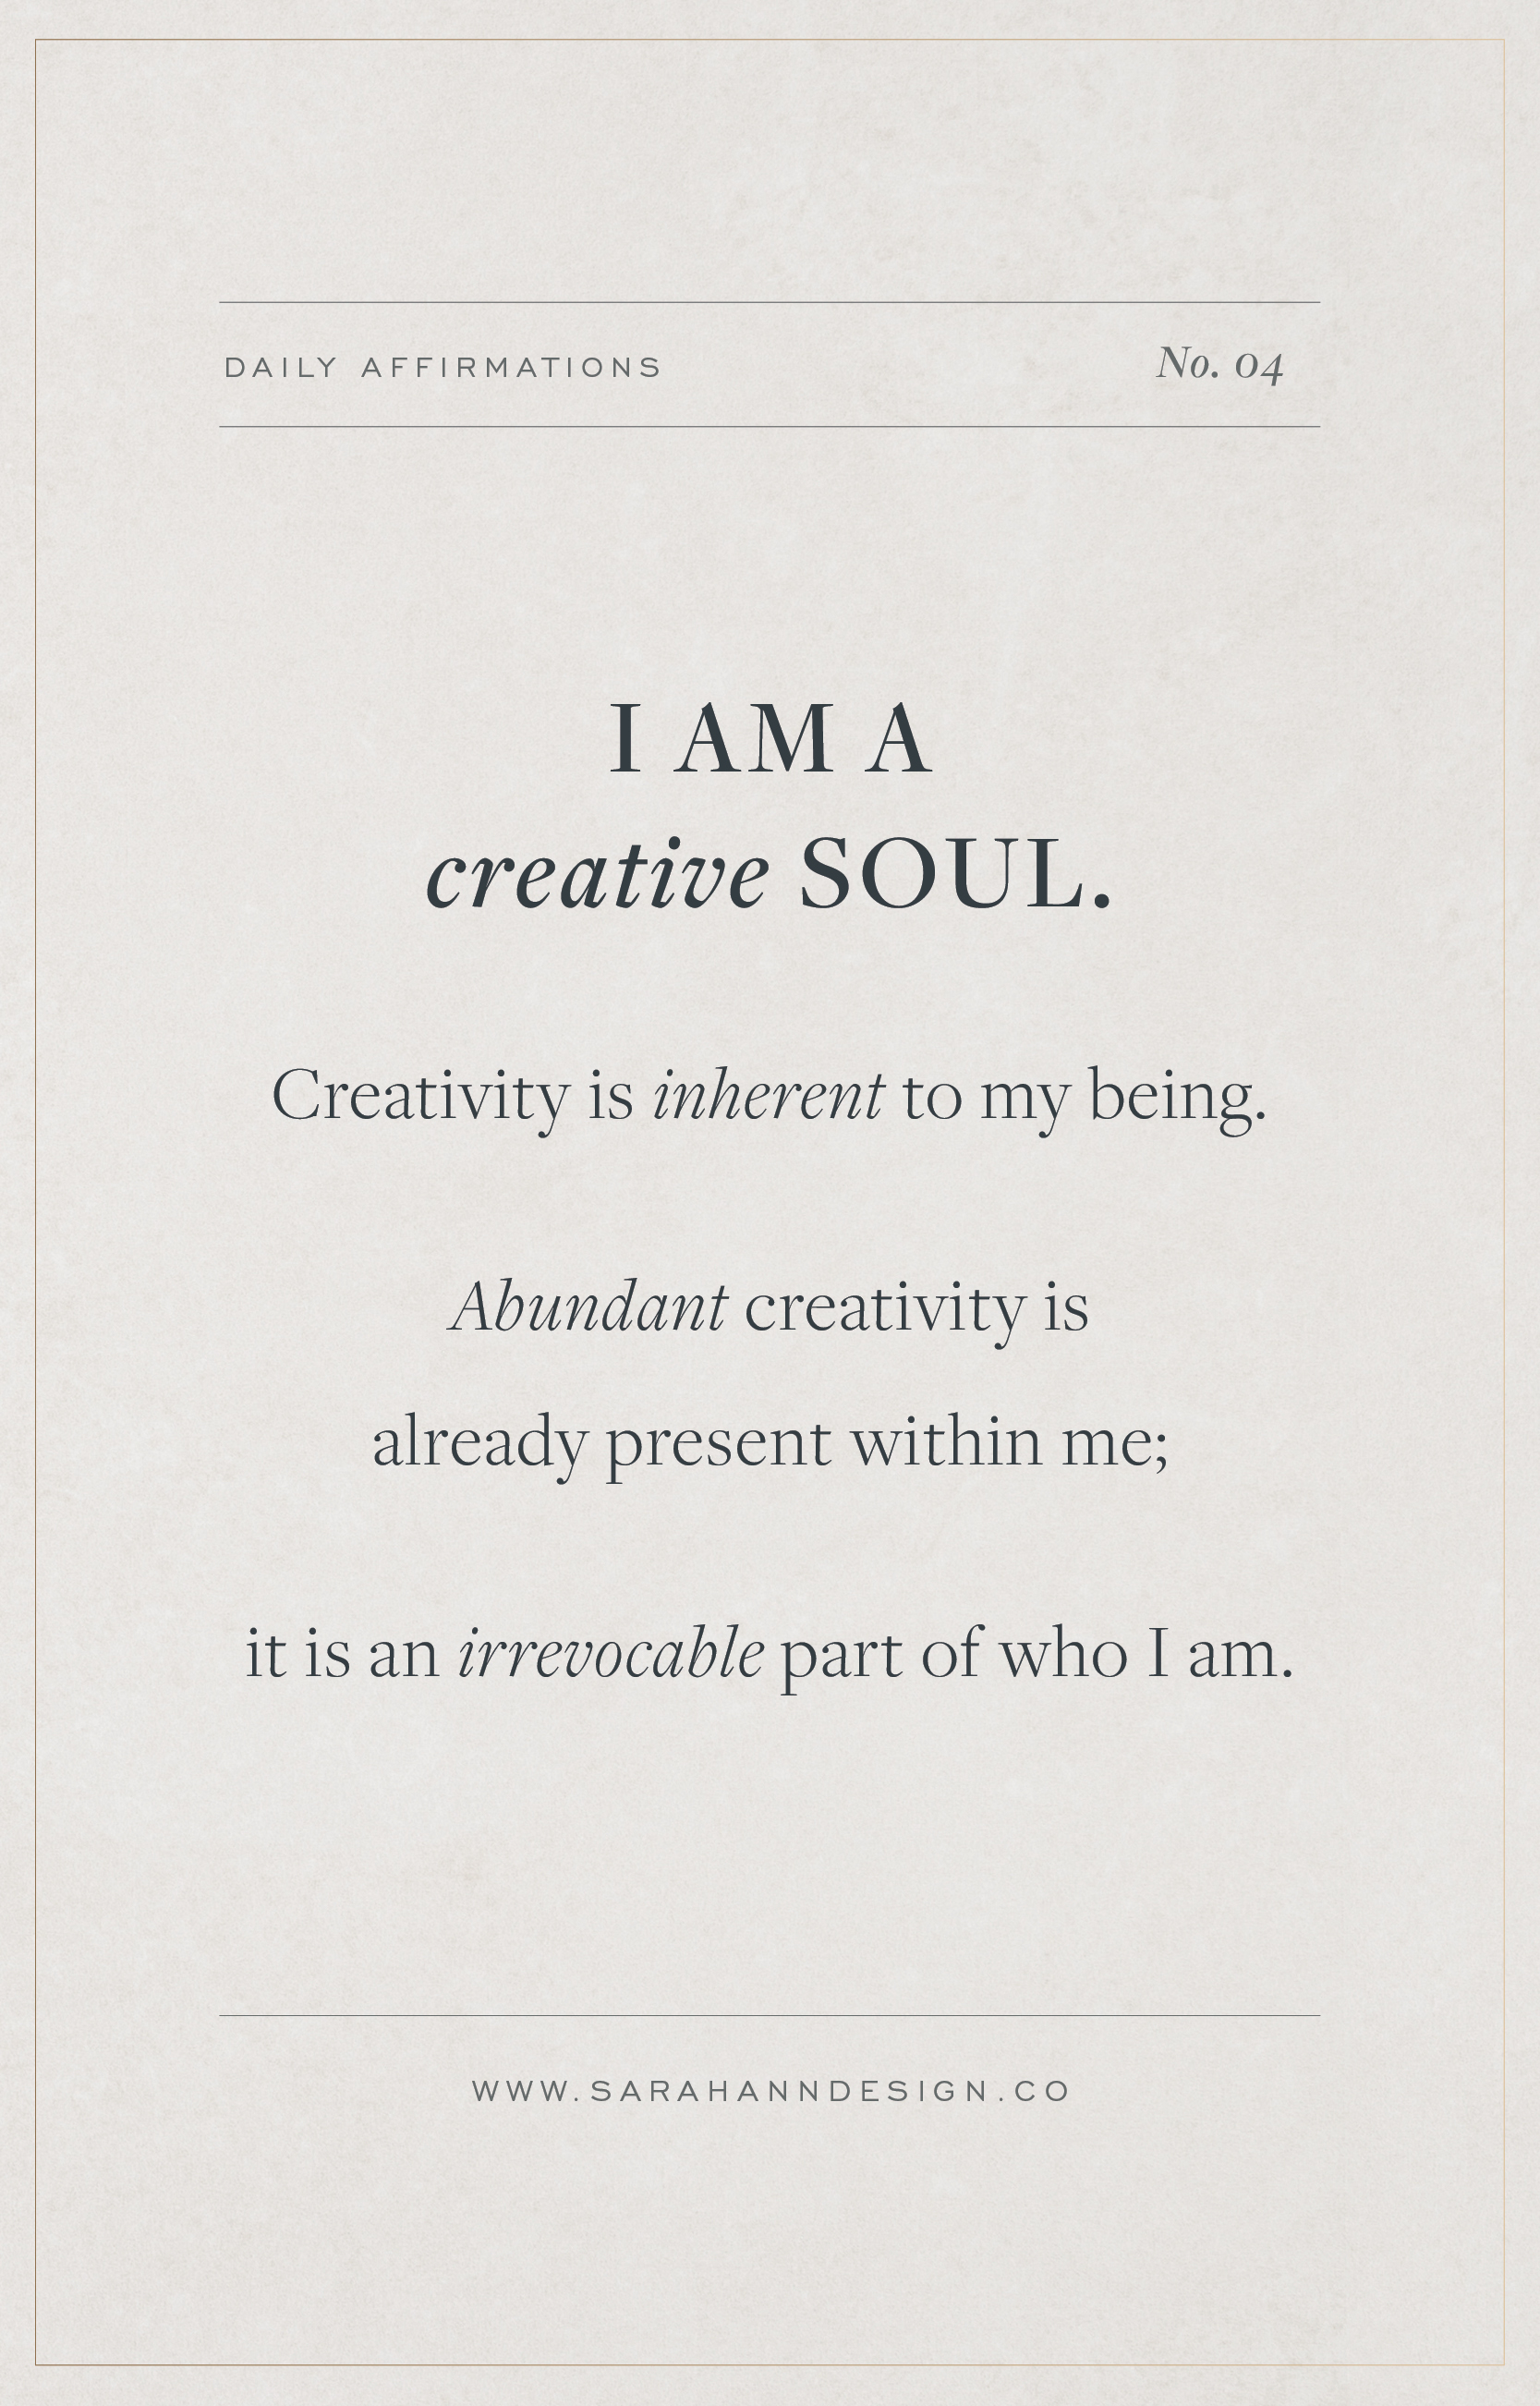 Affirmations for Creatives // 23 Daily Affirmations for Creative ...